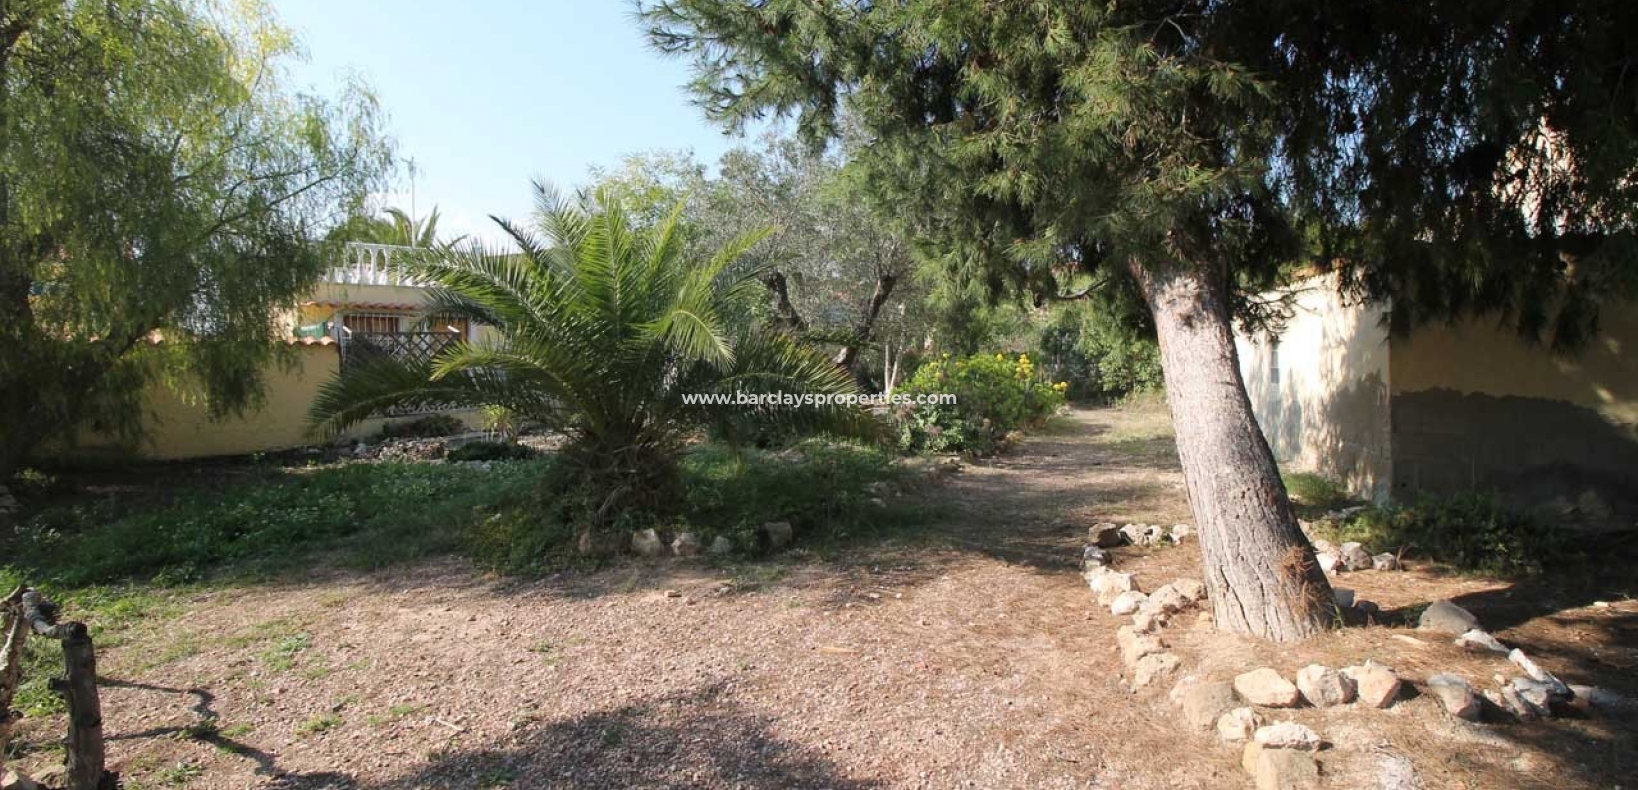 Green Area - South Facing Property For Sale In La Marina